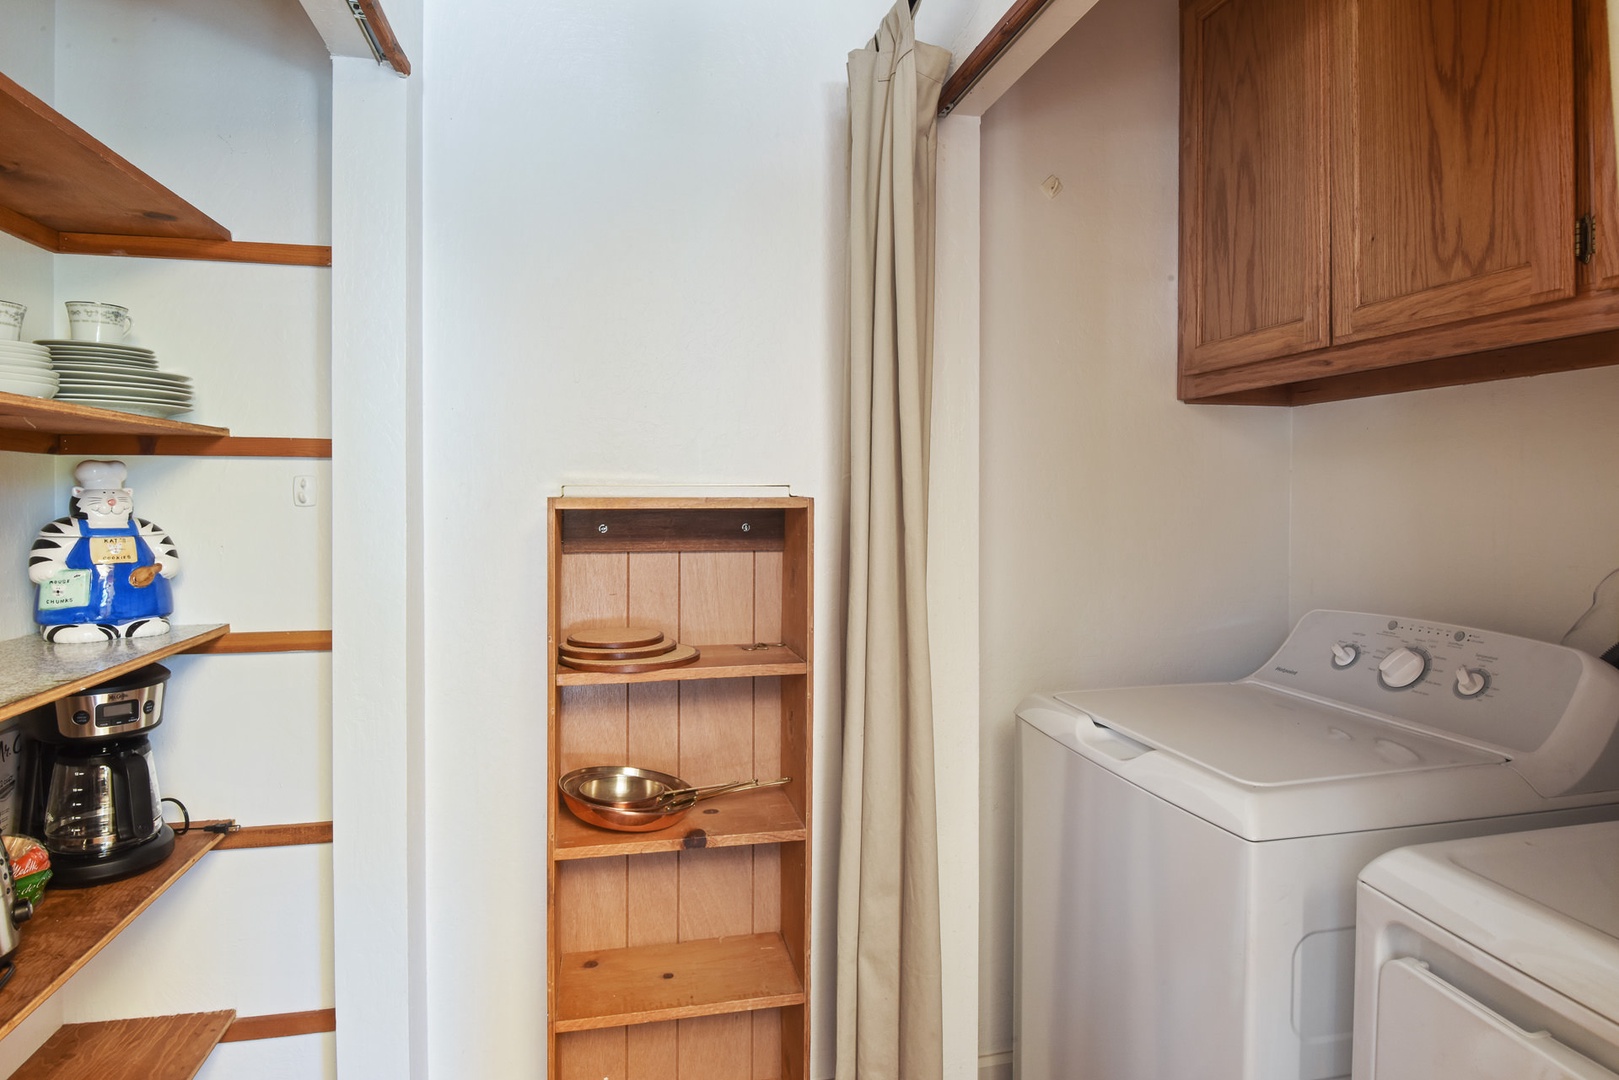 At the End of the Open Kitchen is the Pantry and Full-Size Washer and Dryer